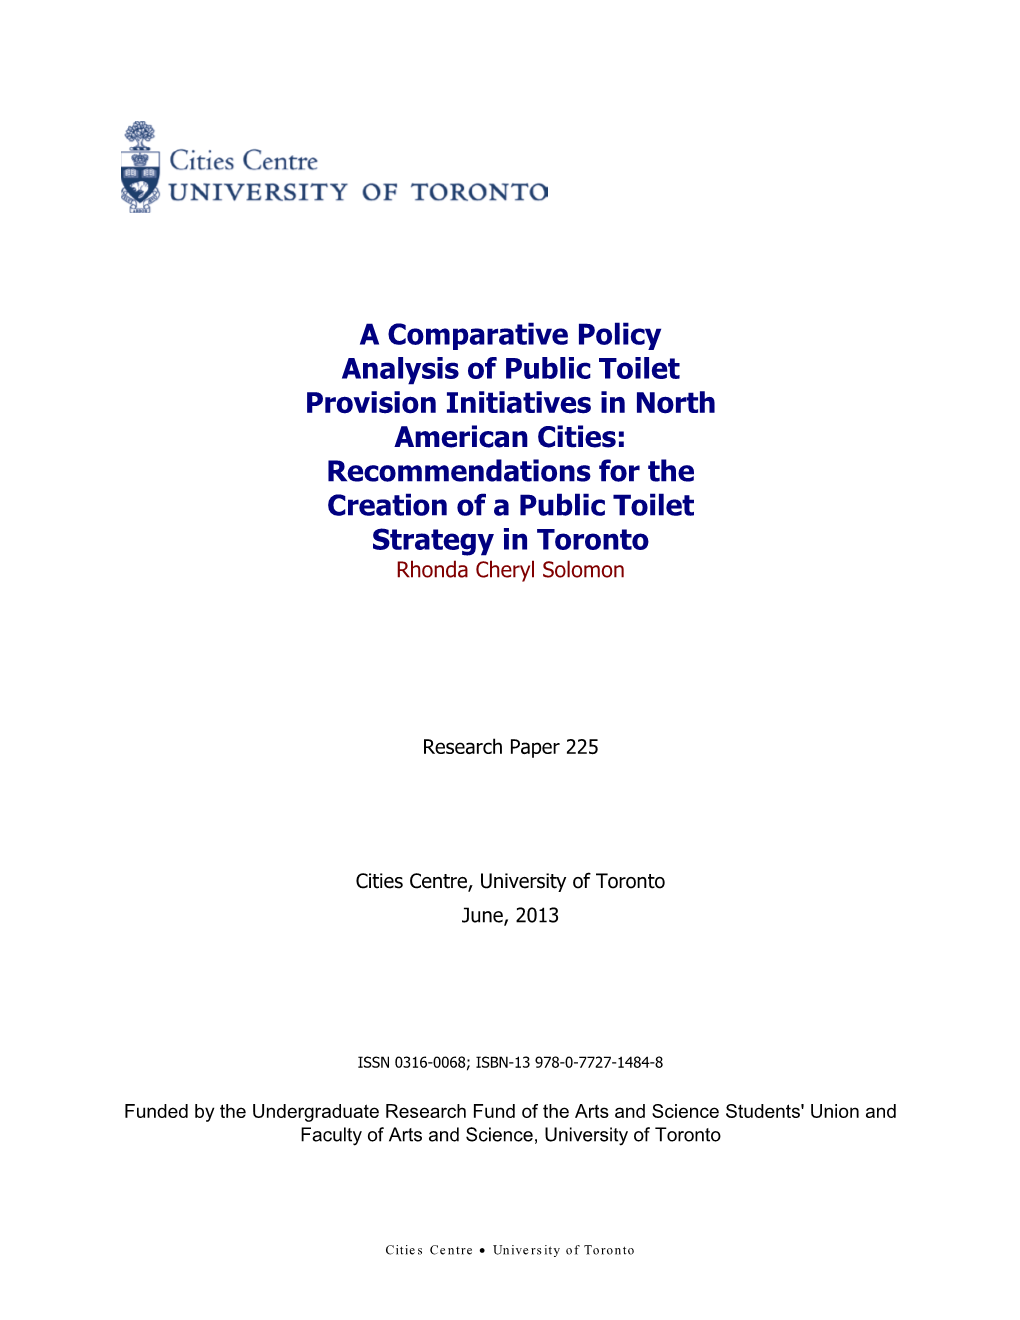 A Comparative Policy Analysis of Public Toilet Provision Initiatives in North American Cities: Recommendations for the Creation